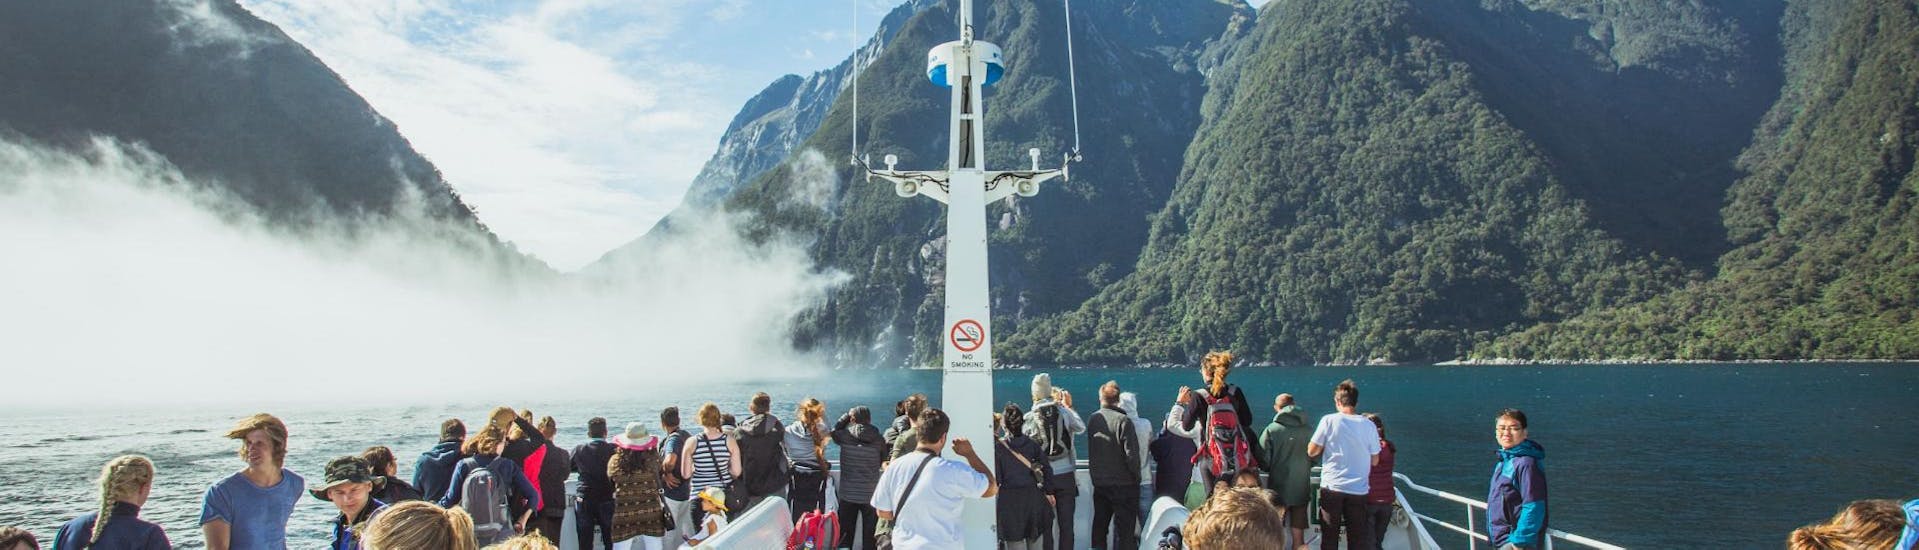 People are enjoying the spectacular views of mountainous area during the Milford Sound Cruise "Classic" - Winter organised by Jucy Cruise.